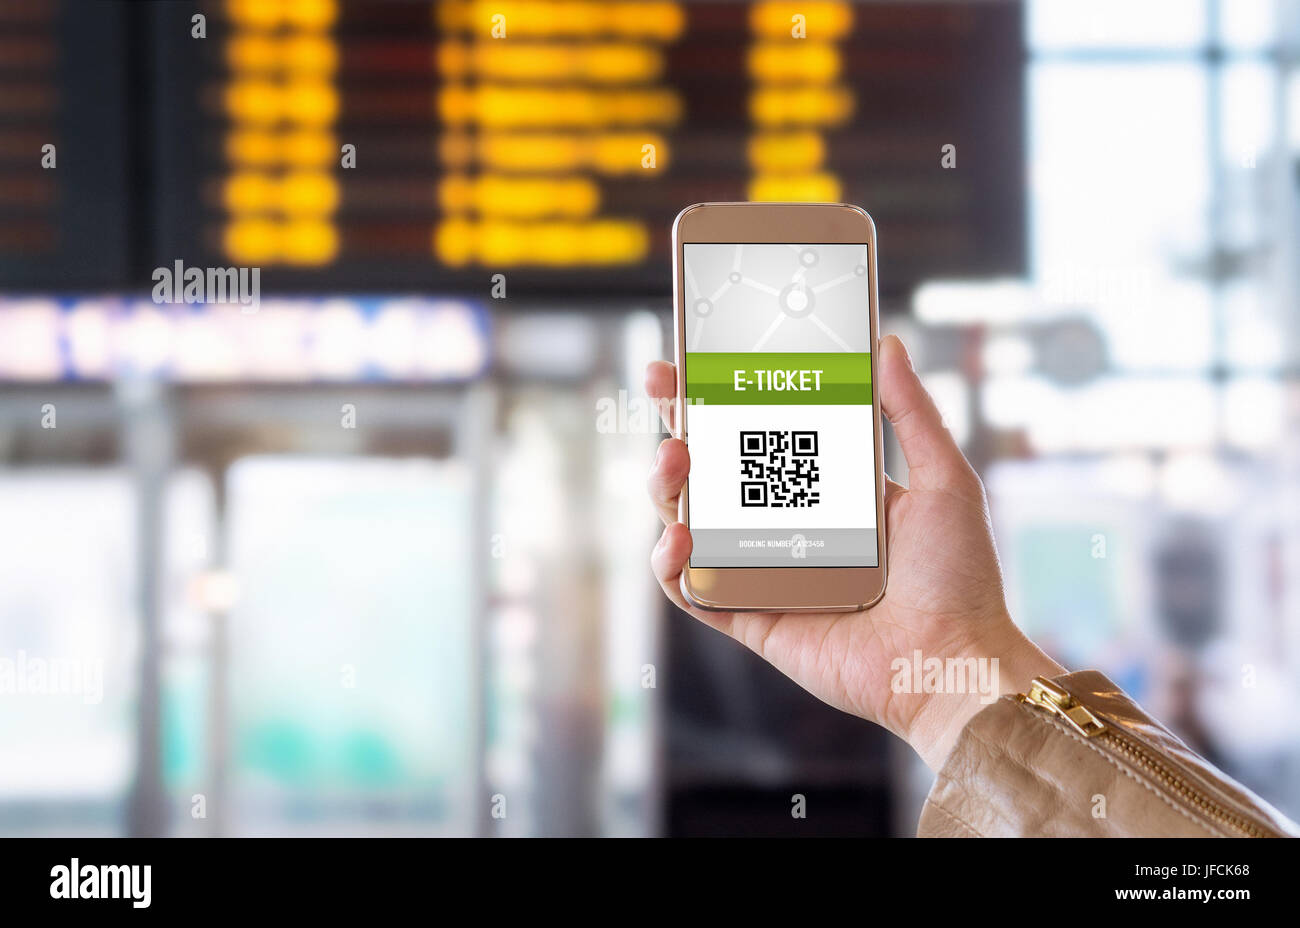 E-ticket on smartphone screen with timetable in the blurred background. Buying online ticket from internet. Universal public transportation terminal. Stock Photo